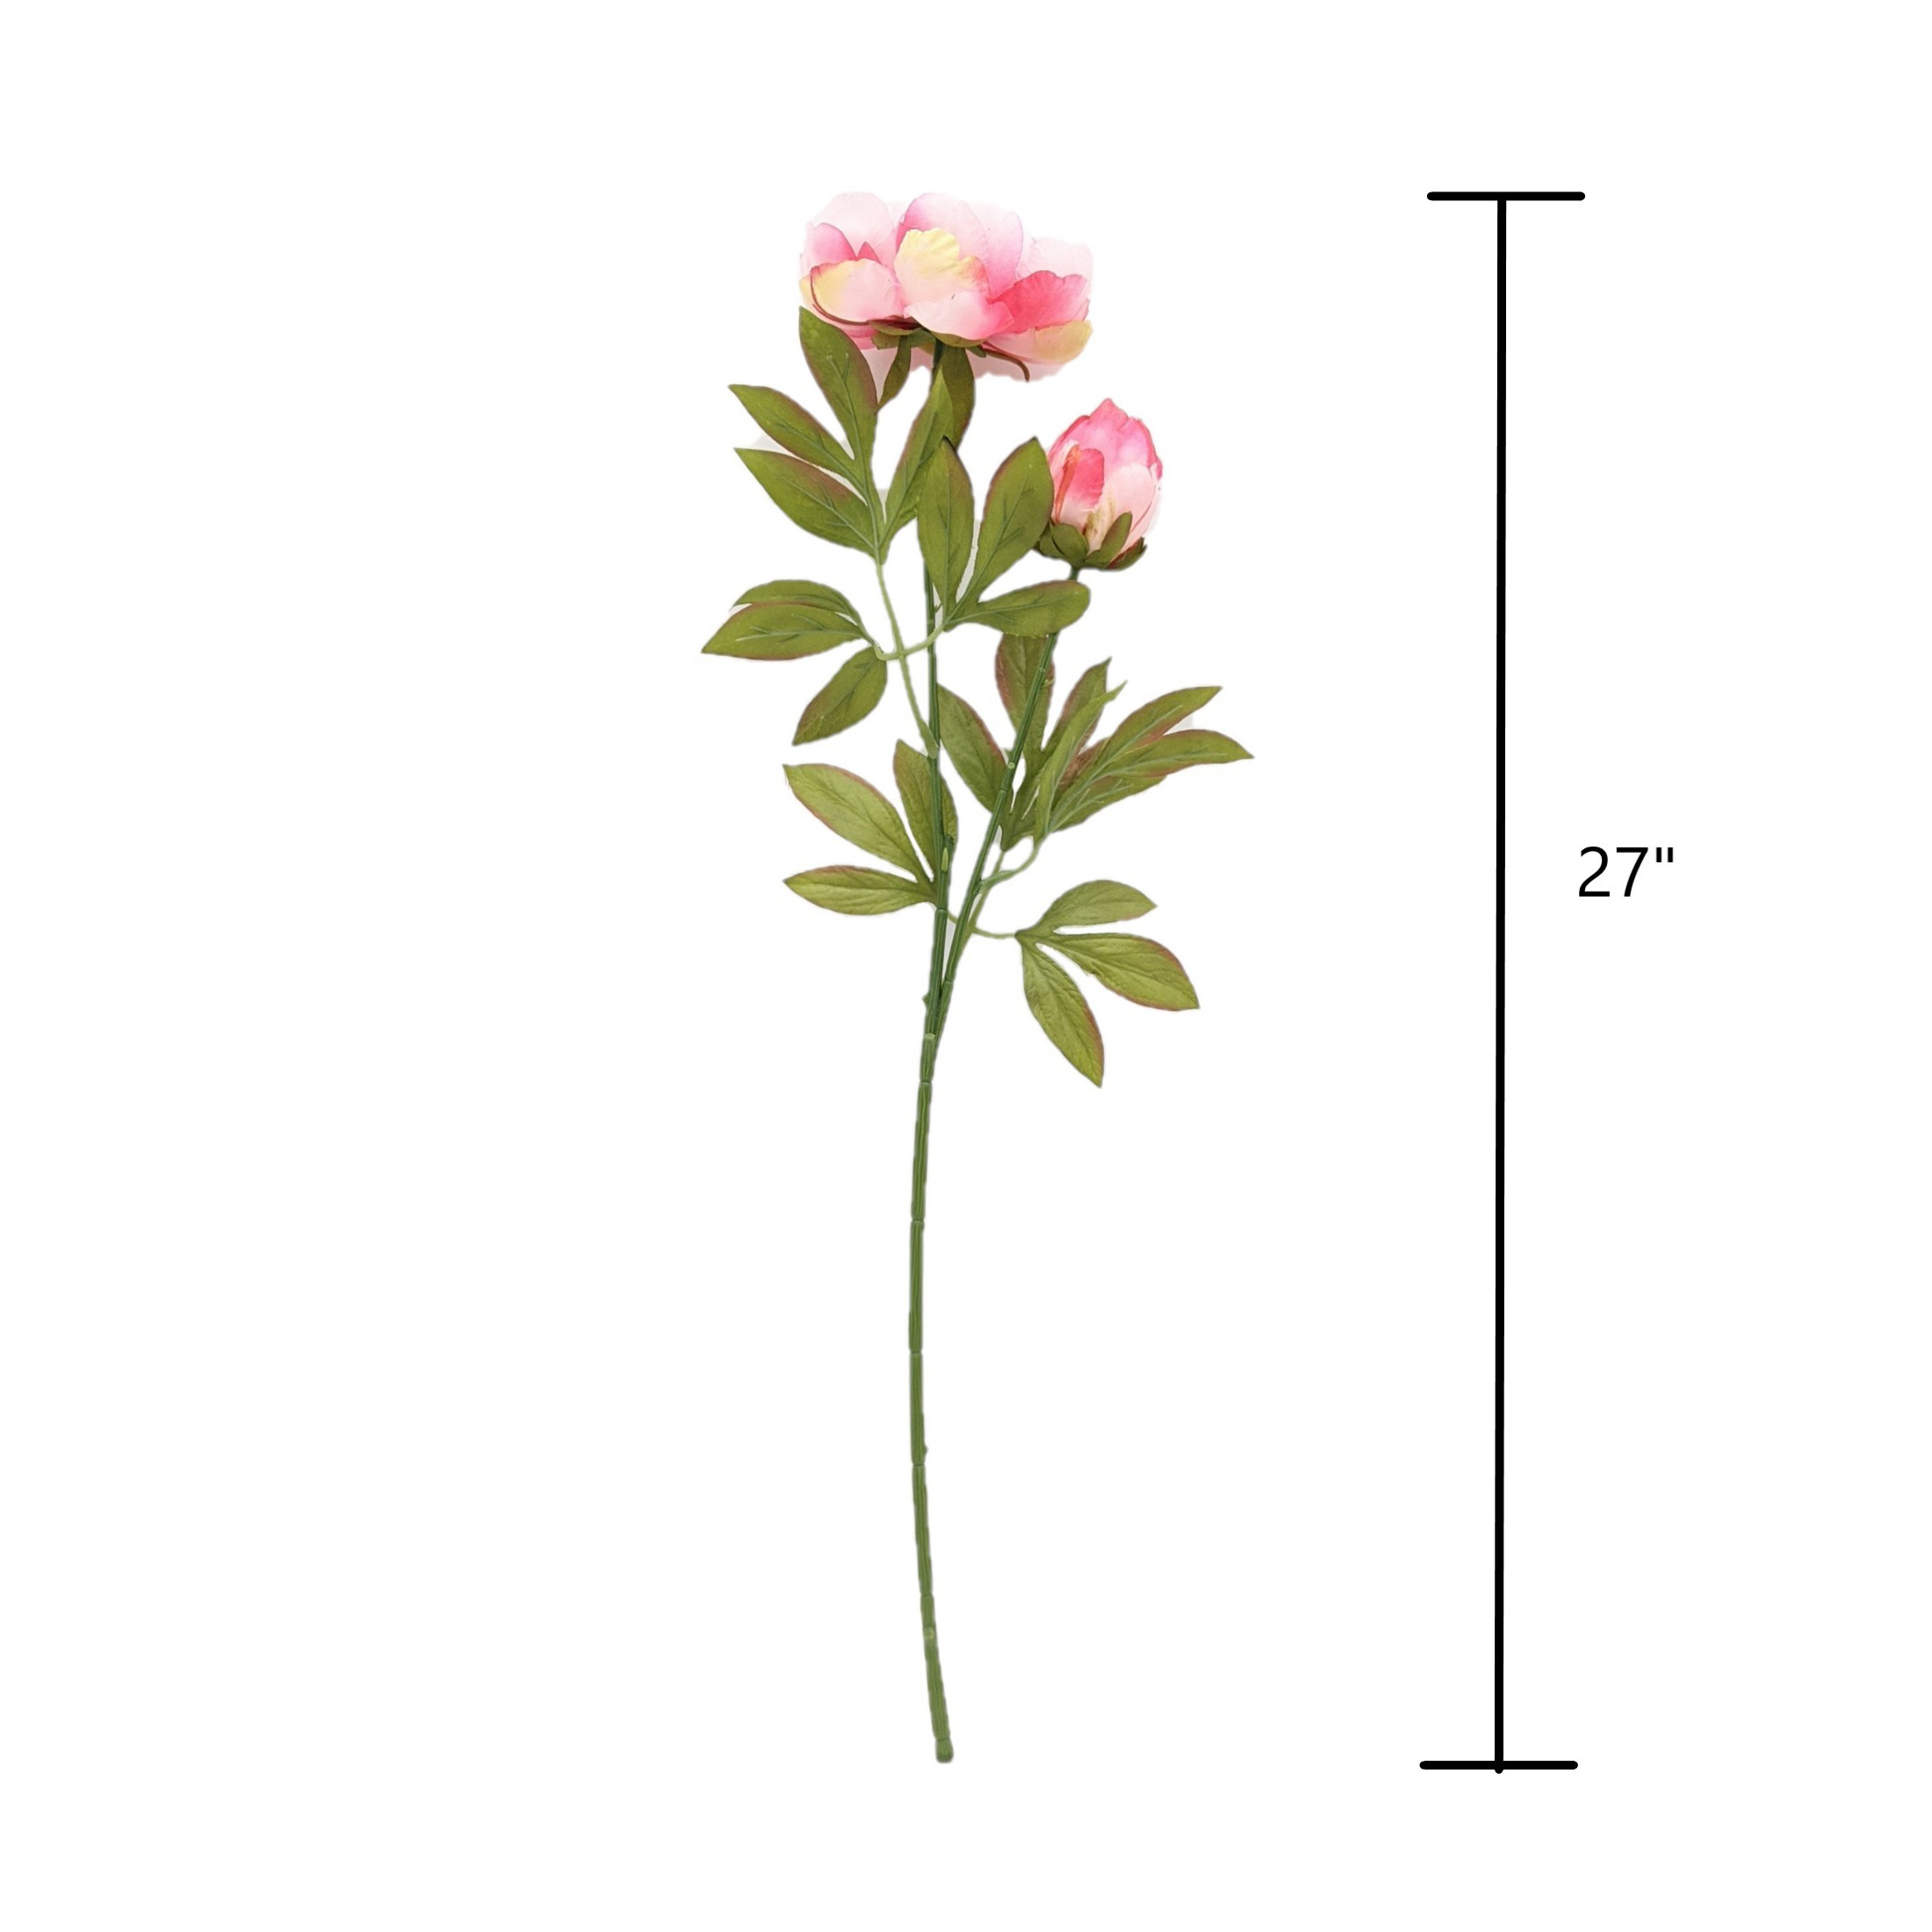 Mainstays 27" Tall Artificial Pink Peony Flower Indoor Stem - image 5 of 5